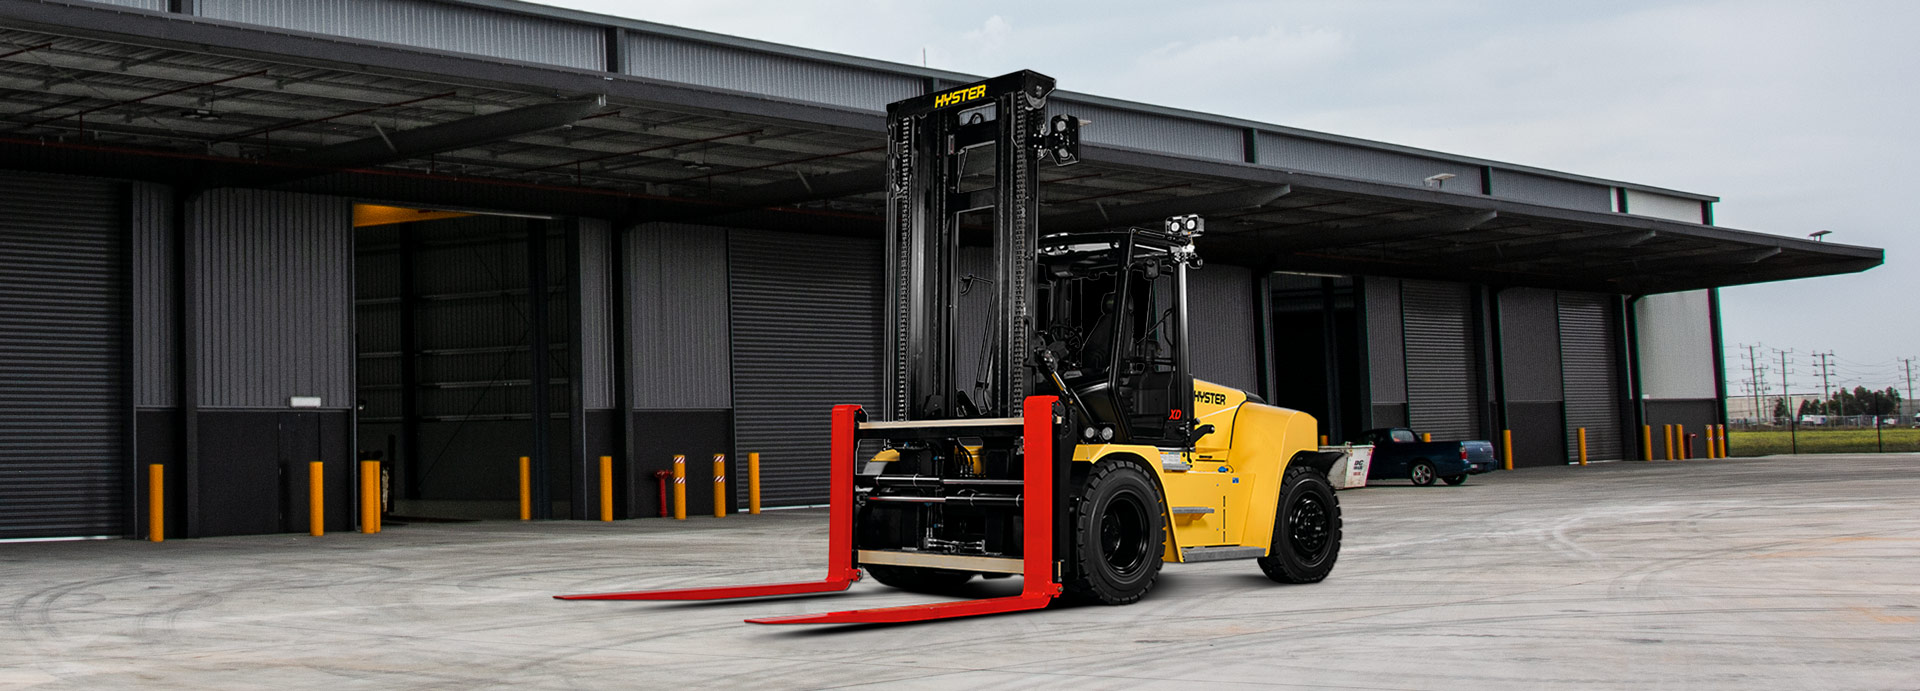 A Hyster forklift in Australia standing on pavement outdoors.